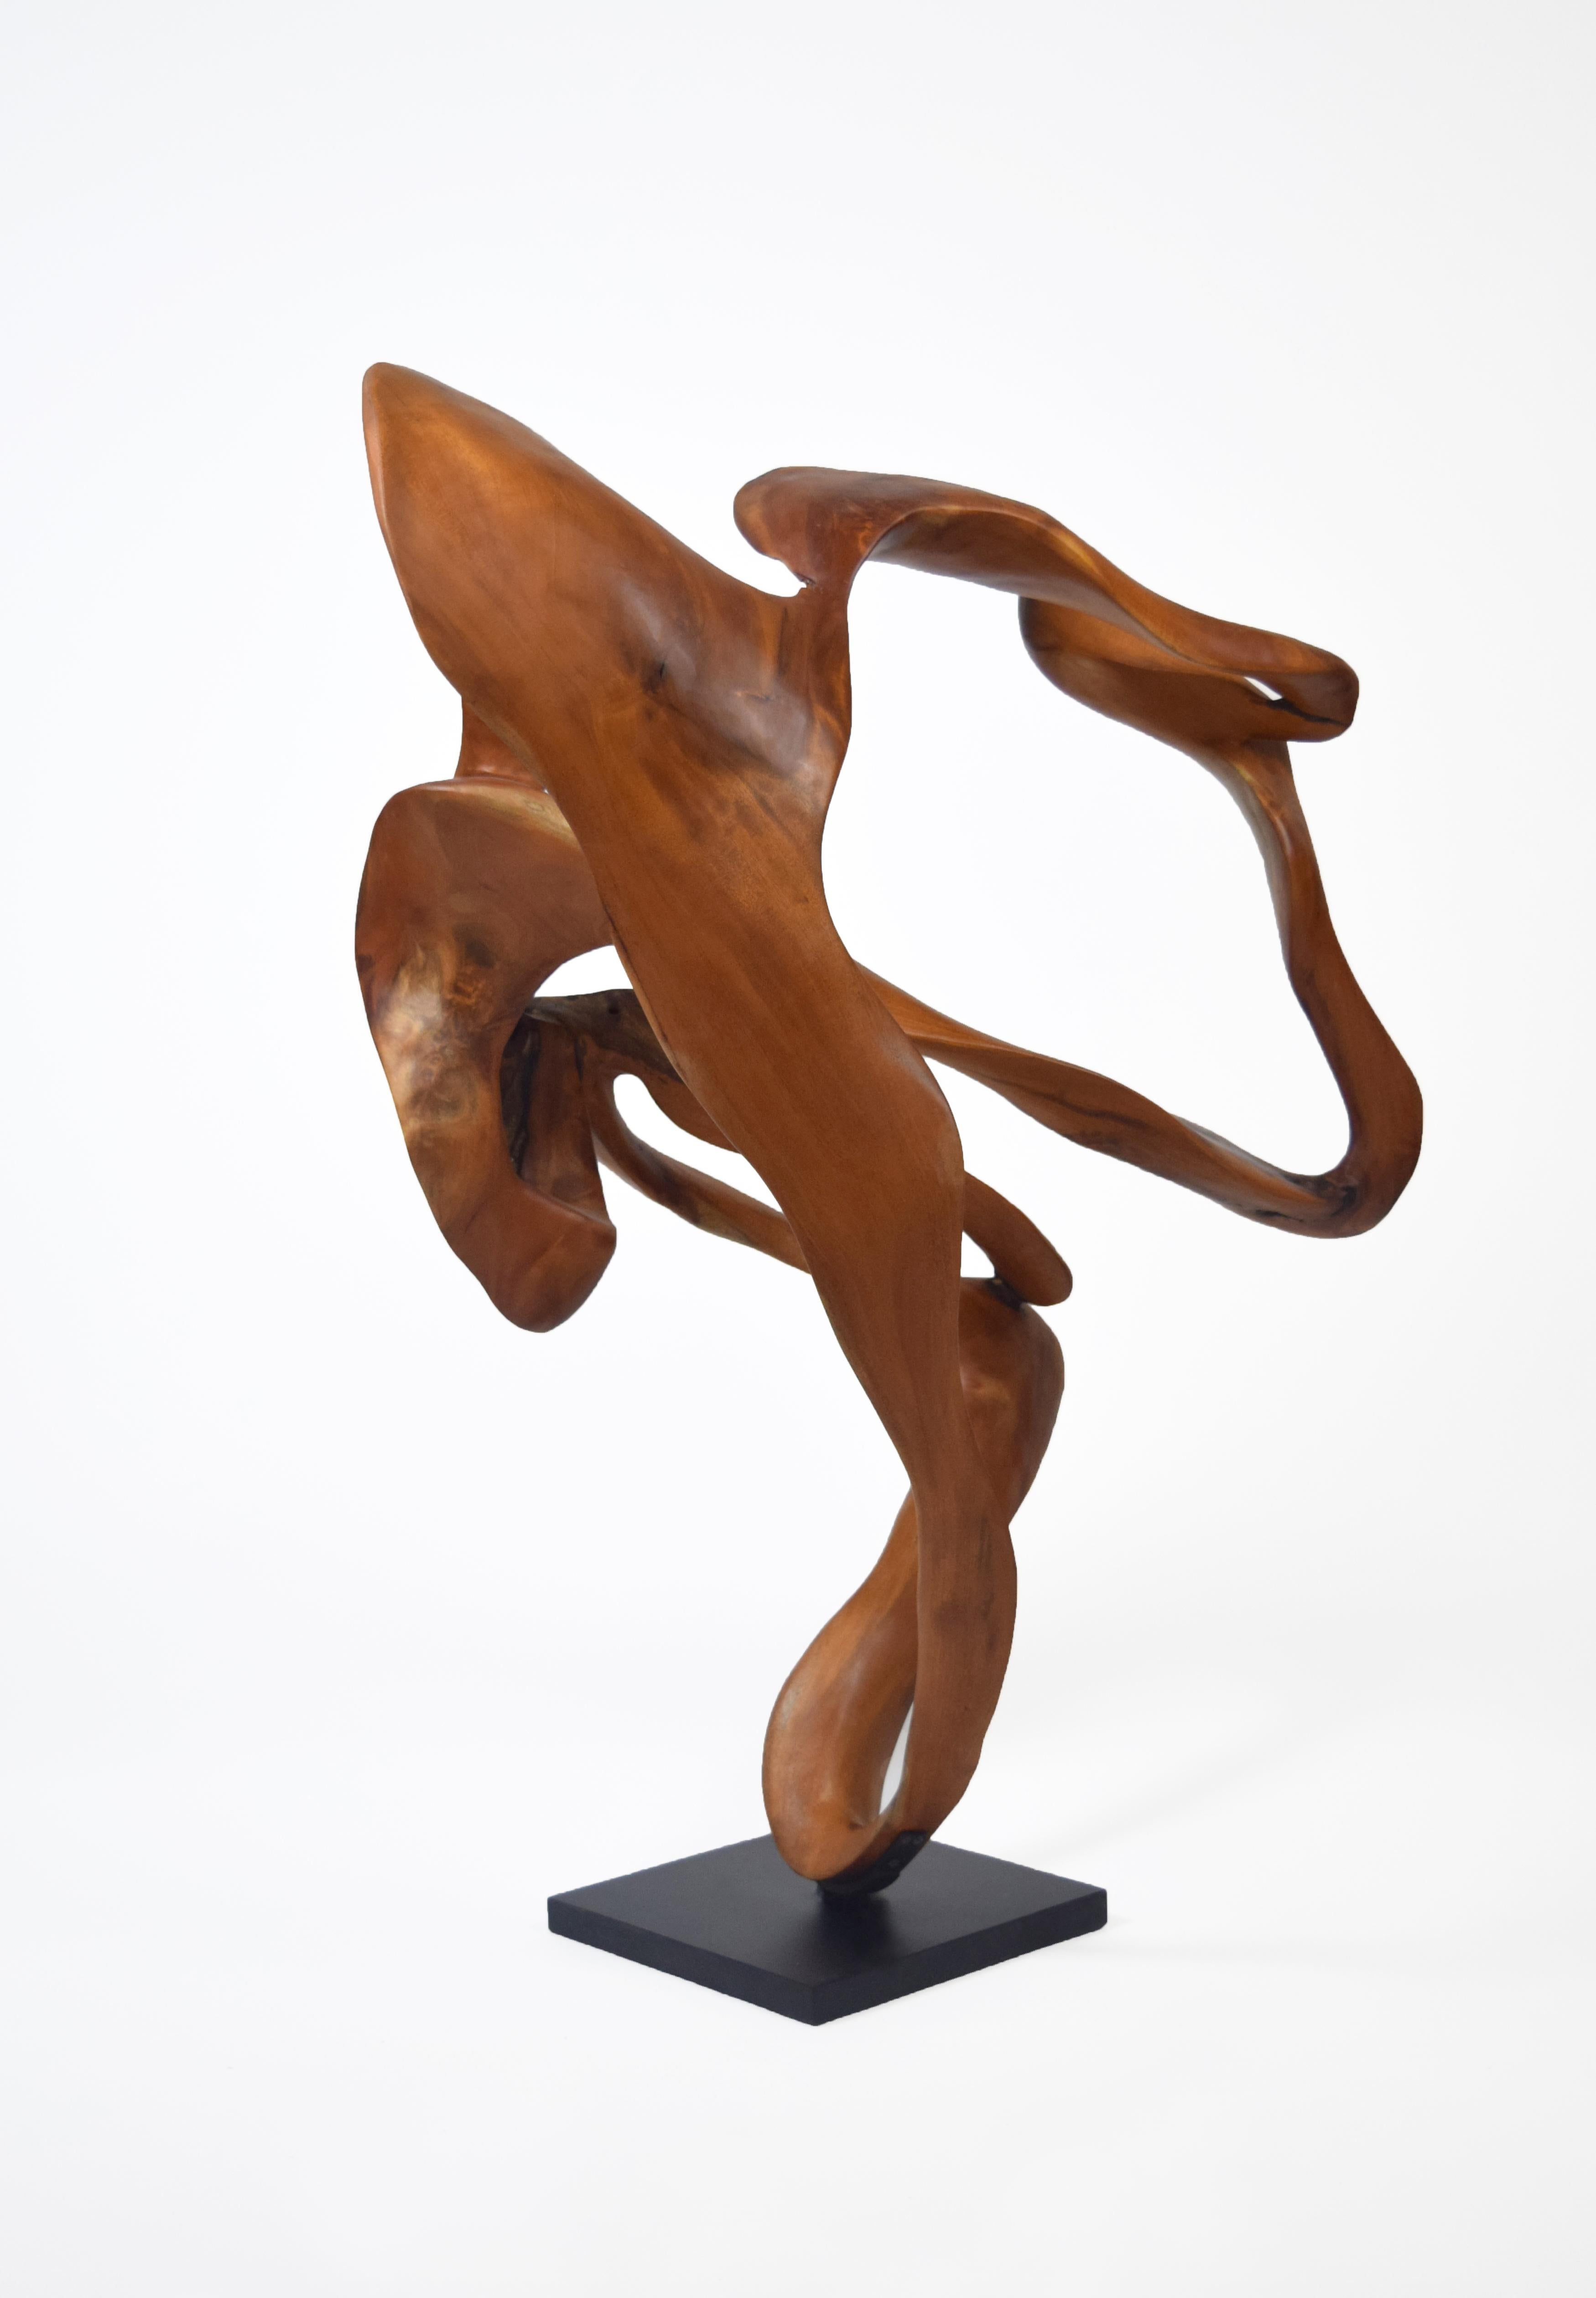 Symphony - 21st Century, Contemporary, Abstract Sculpture, Mahogany Wood, Roots 1